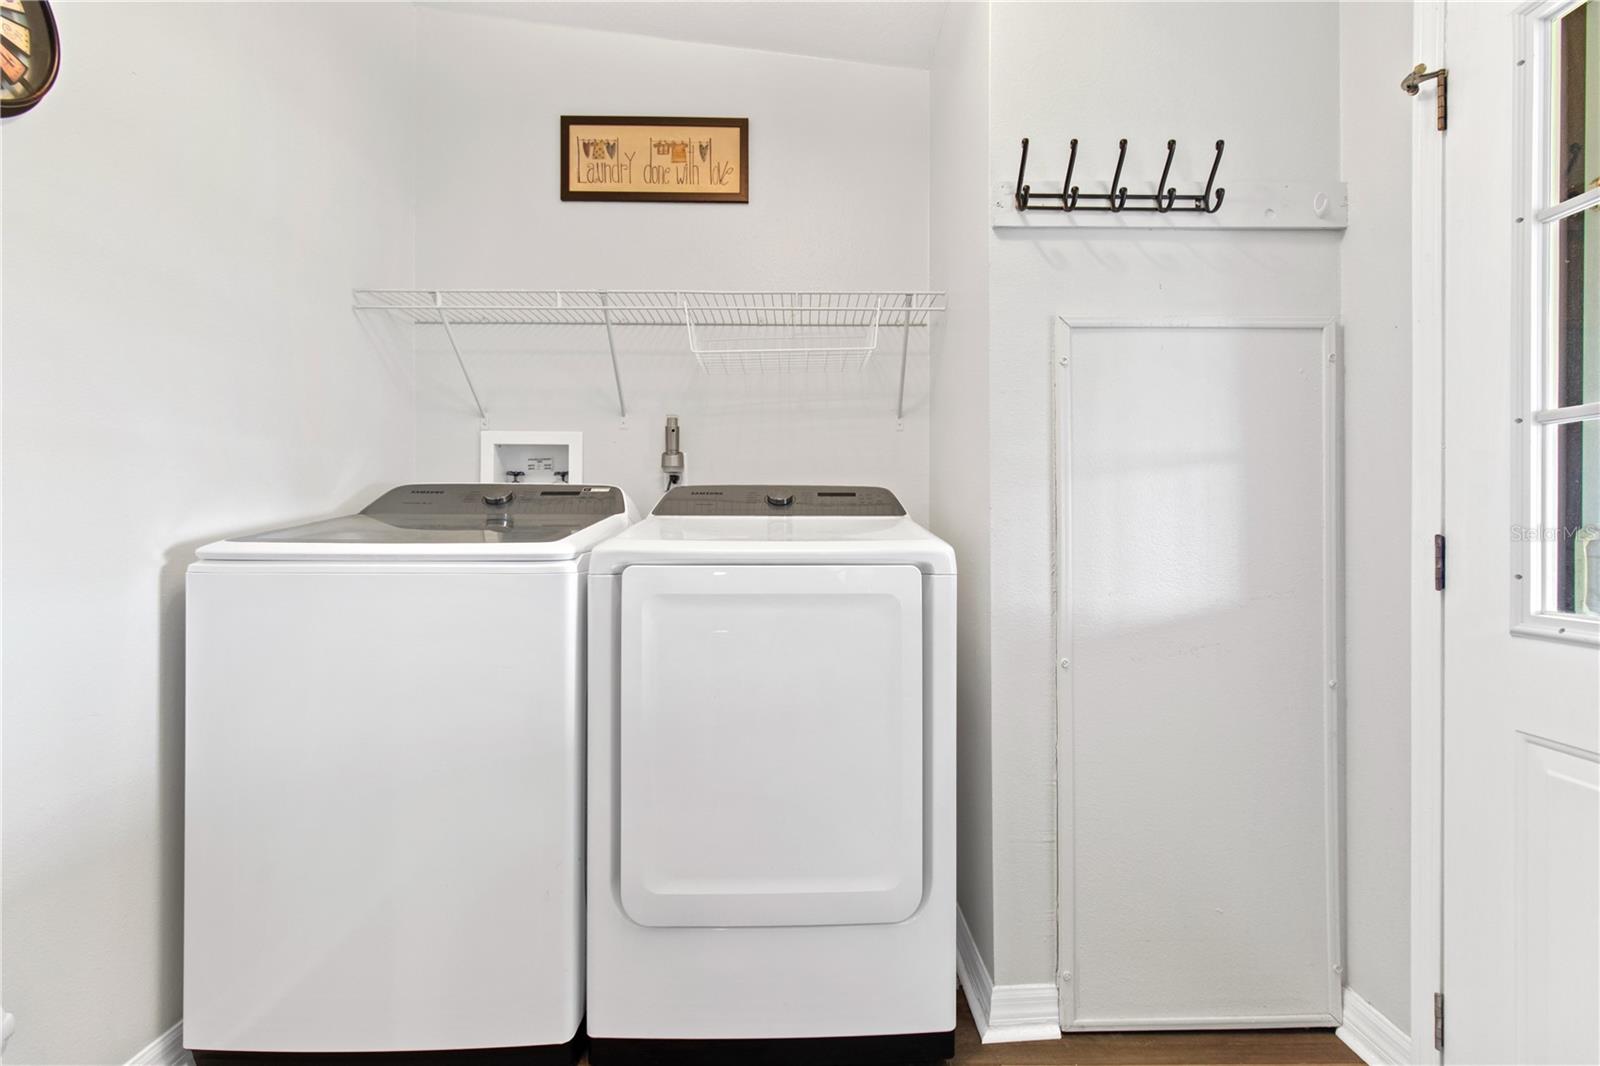 Utility room off kitchen is indoor laundry room. Washer & Dryer convey.